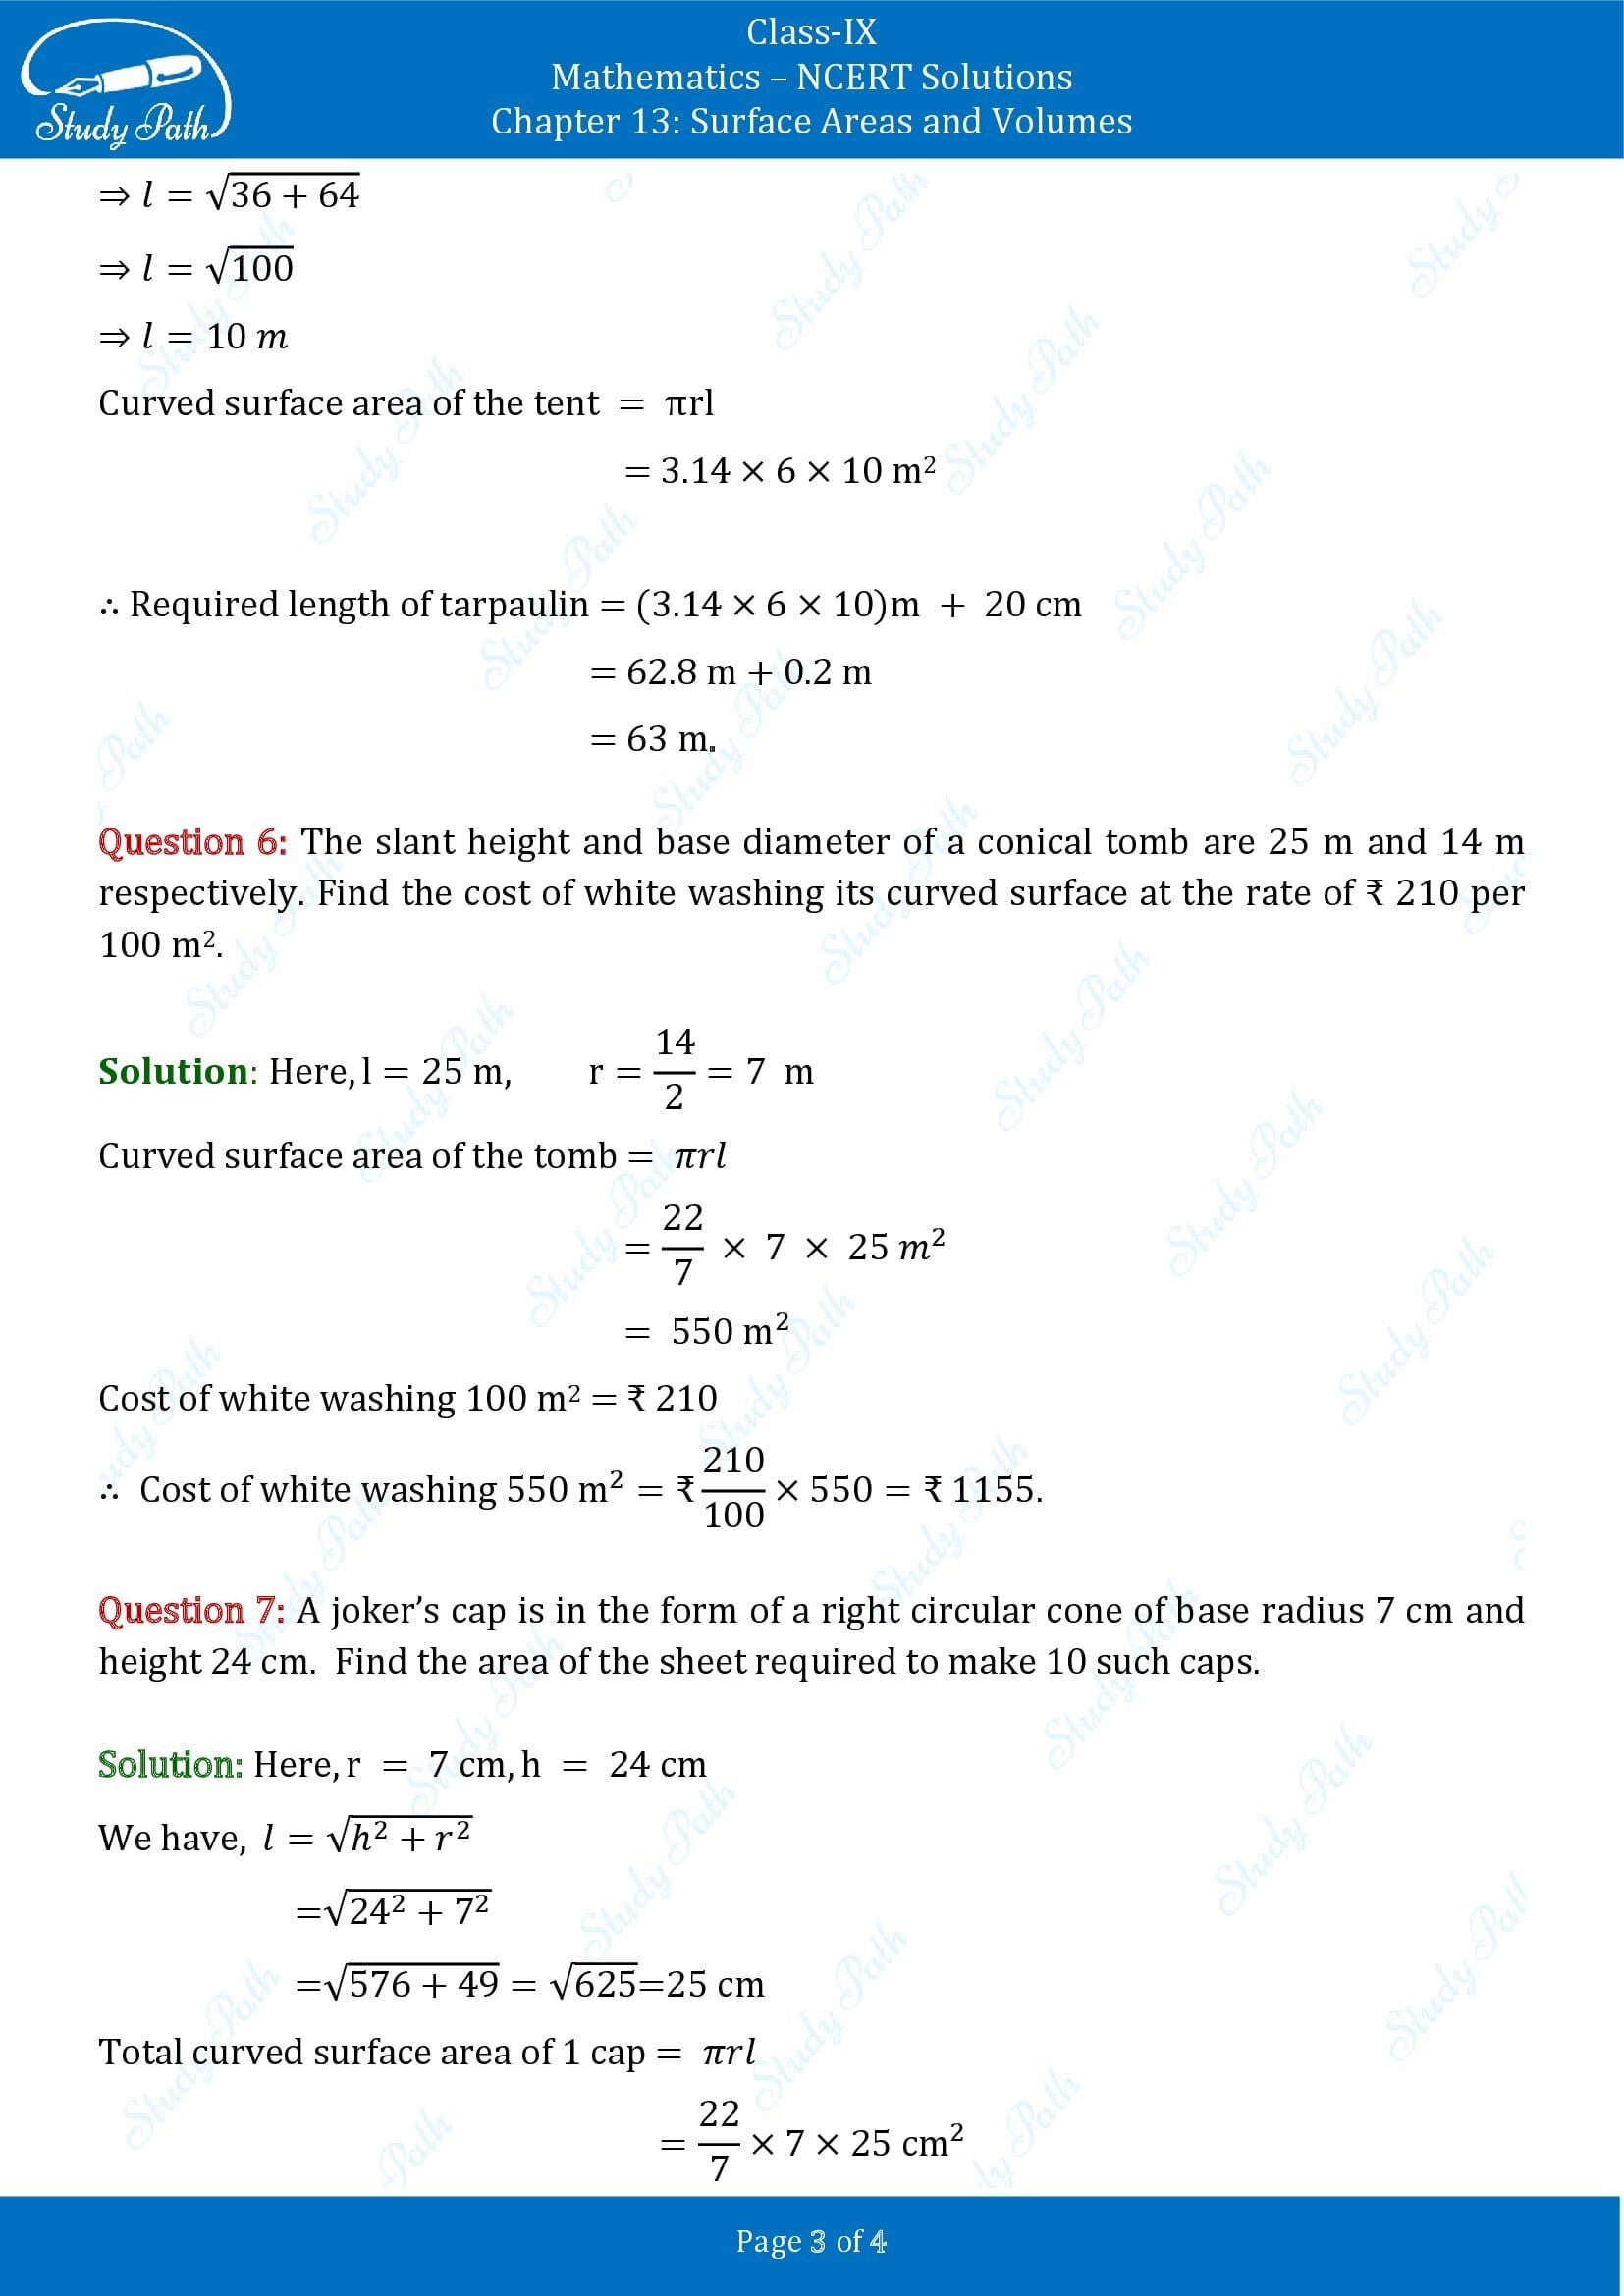 NCERT Solutions for Class 9 Maths Chapter 13 Surface Areas and Volumes Exercise 13.3 00003